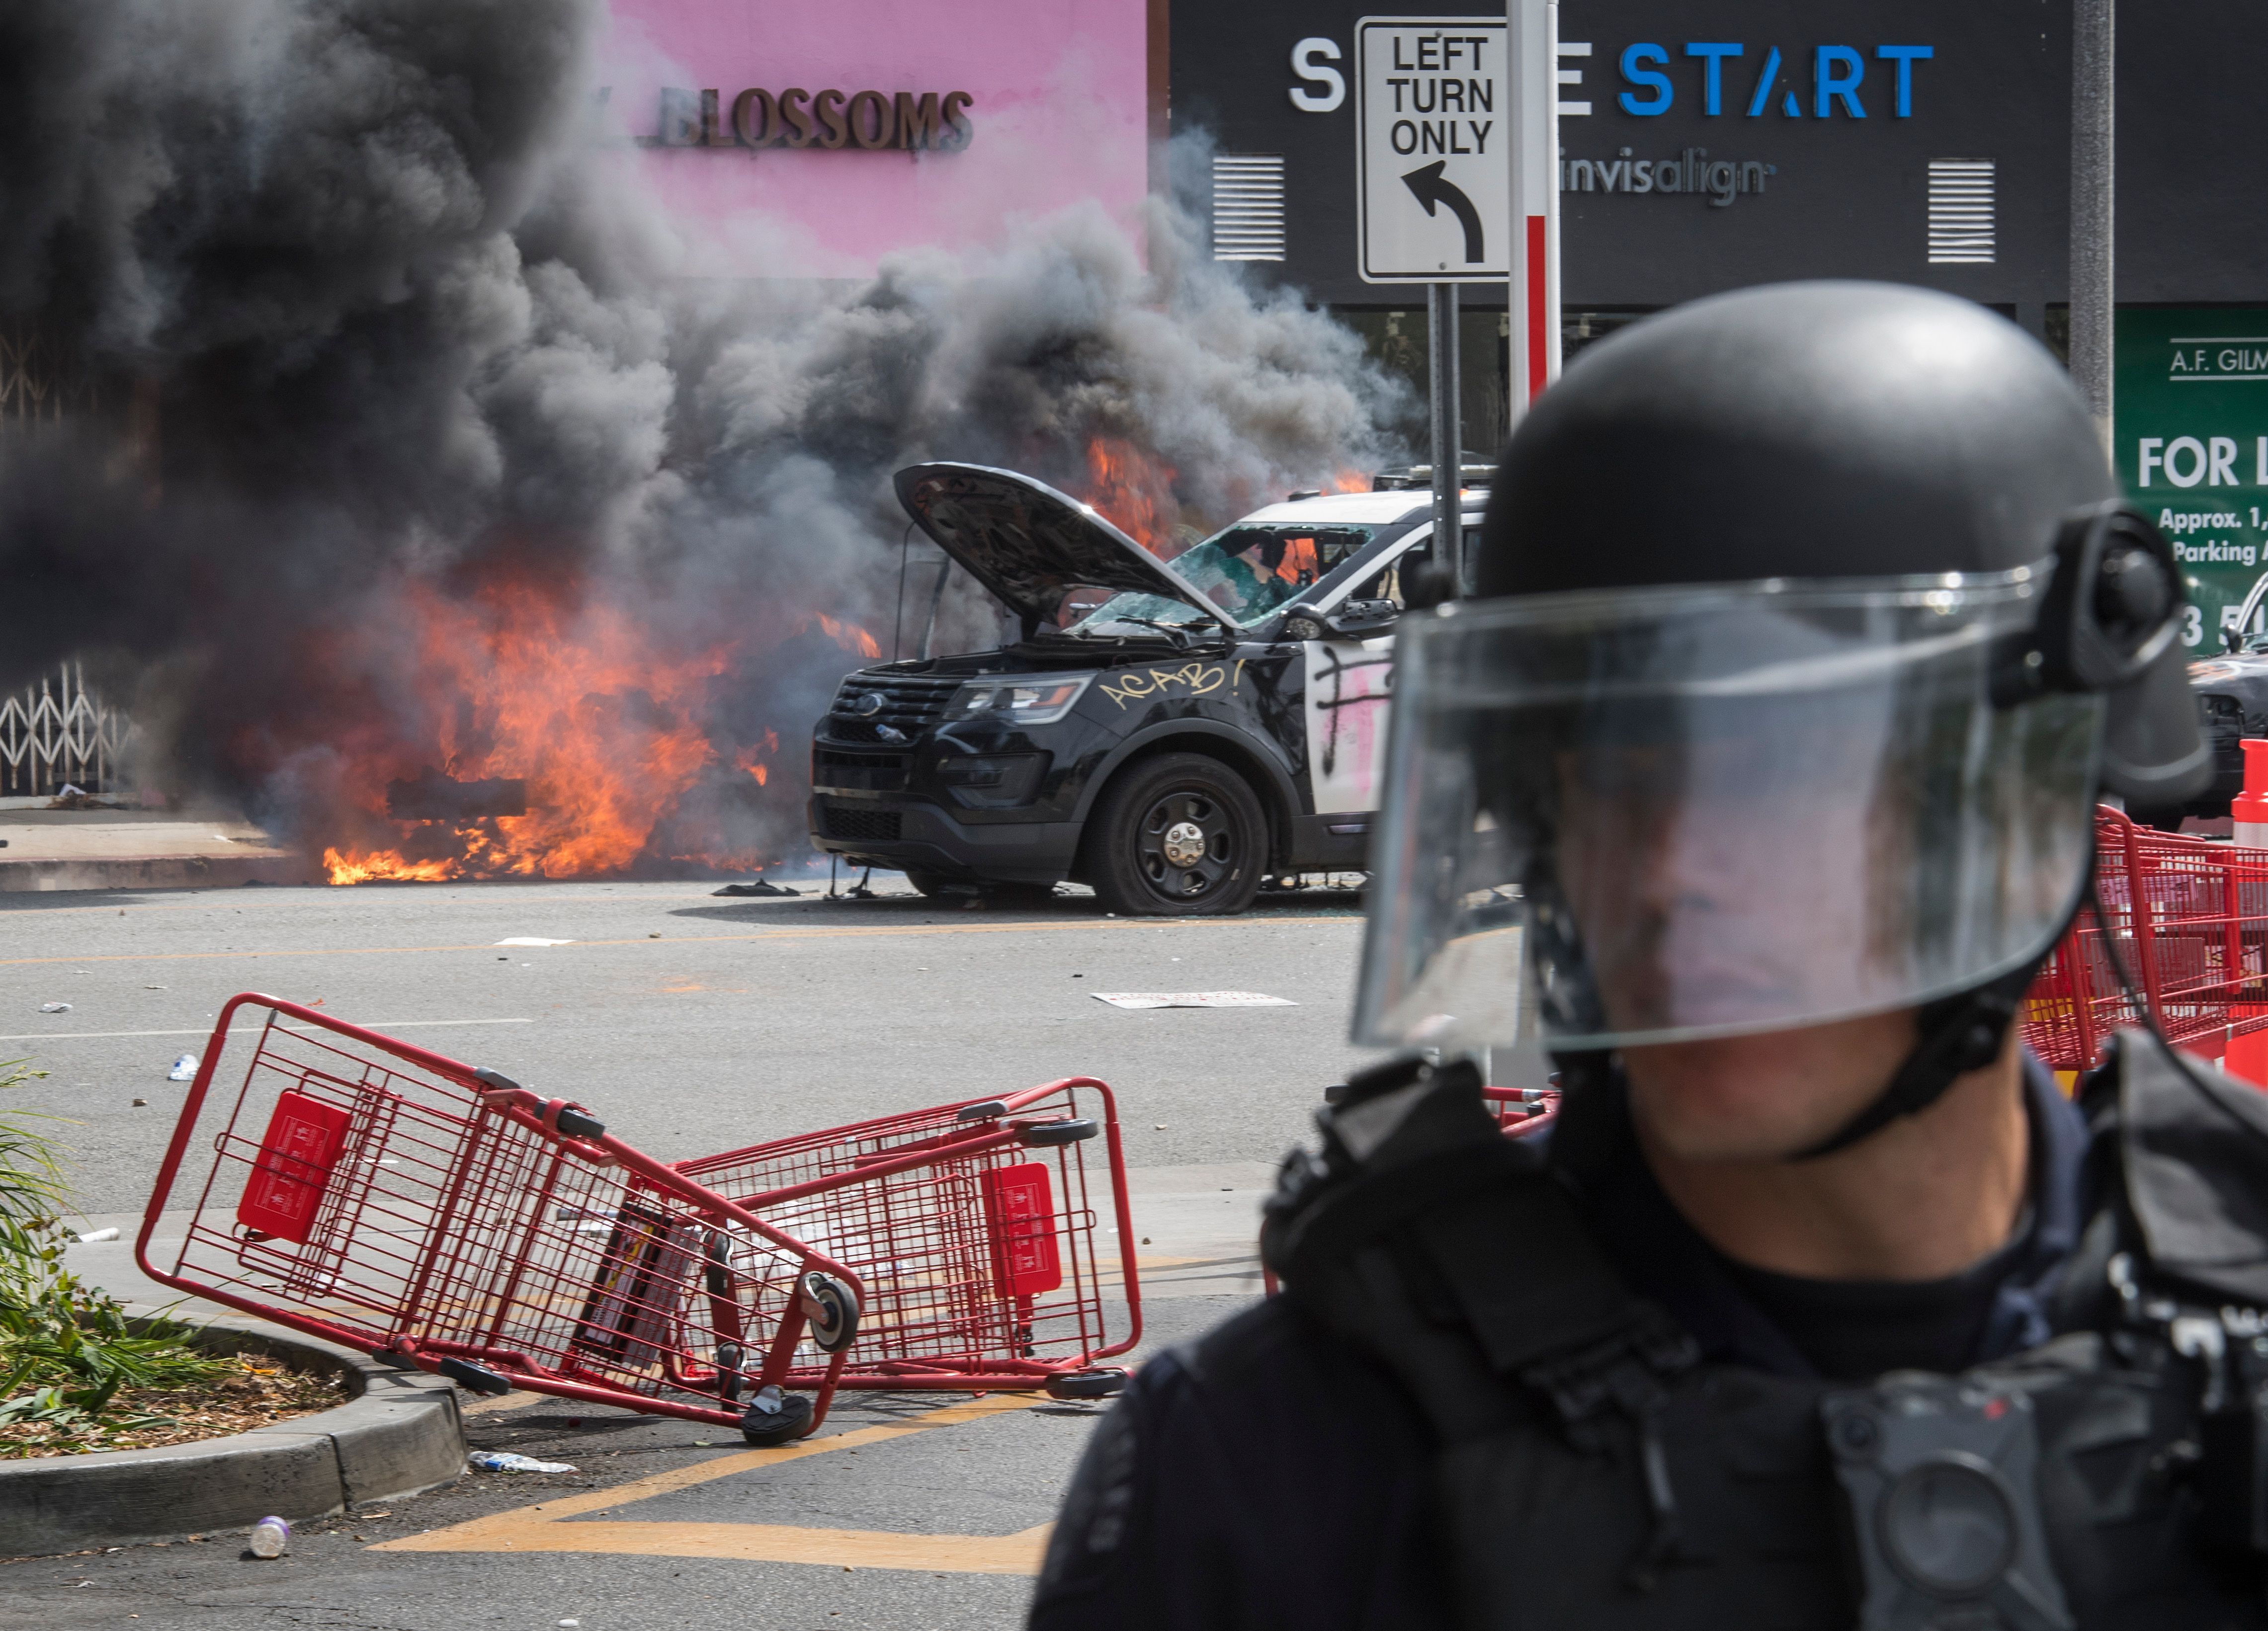 Police vehicles burn after being set on fire by demonstrators in the Fairfax District as they protest the death of George Floydon May 30, 2020 in Los Angeles.